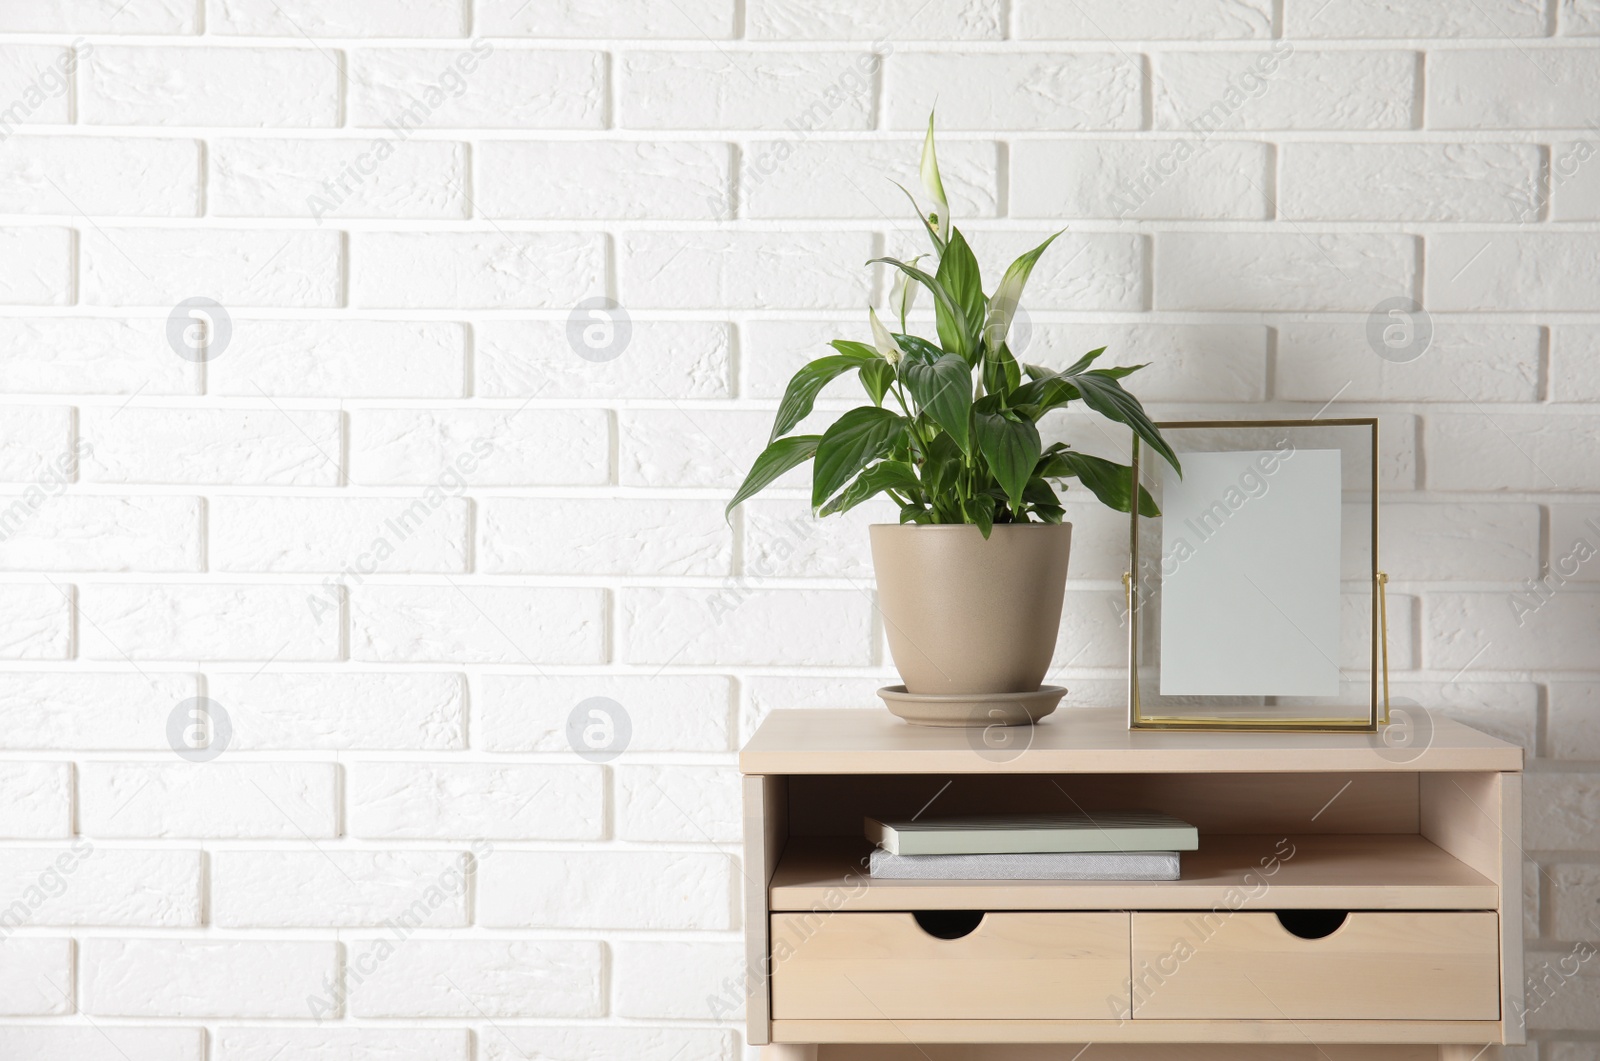 Photo of Spathiphyllum plant in pot and photo frame on table near brick wall, space for text. Home decor